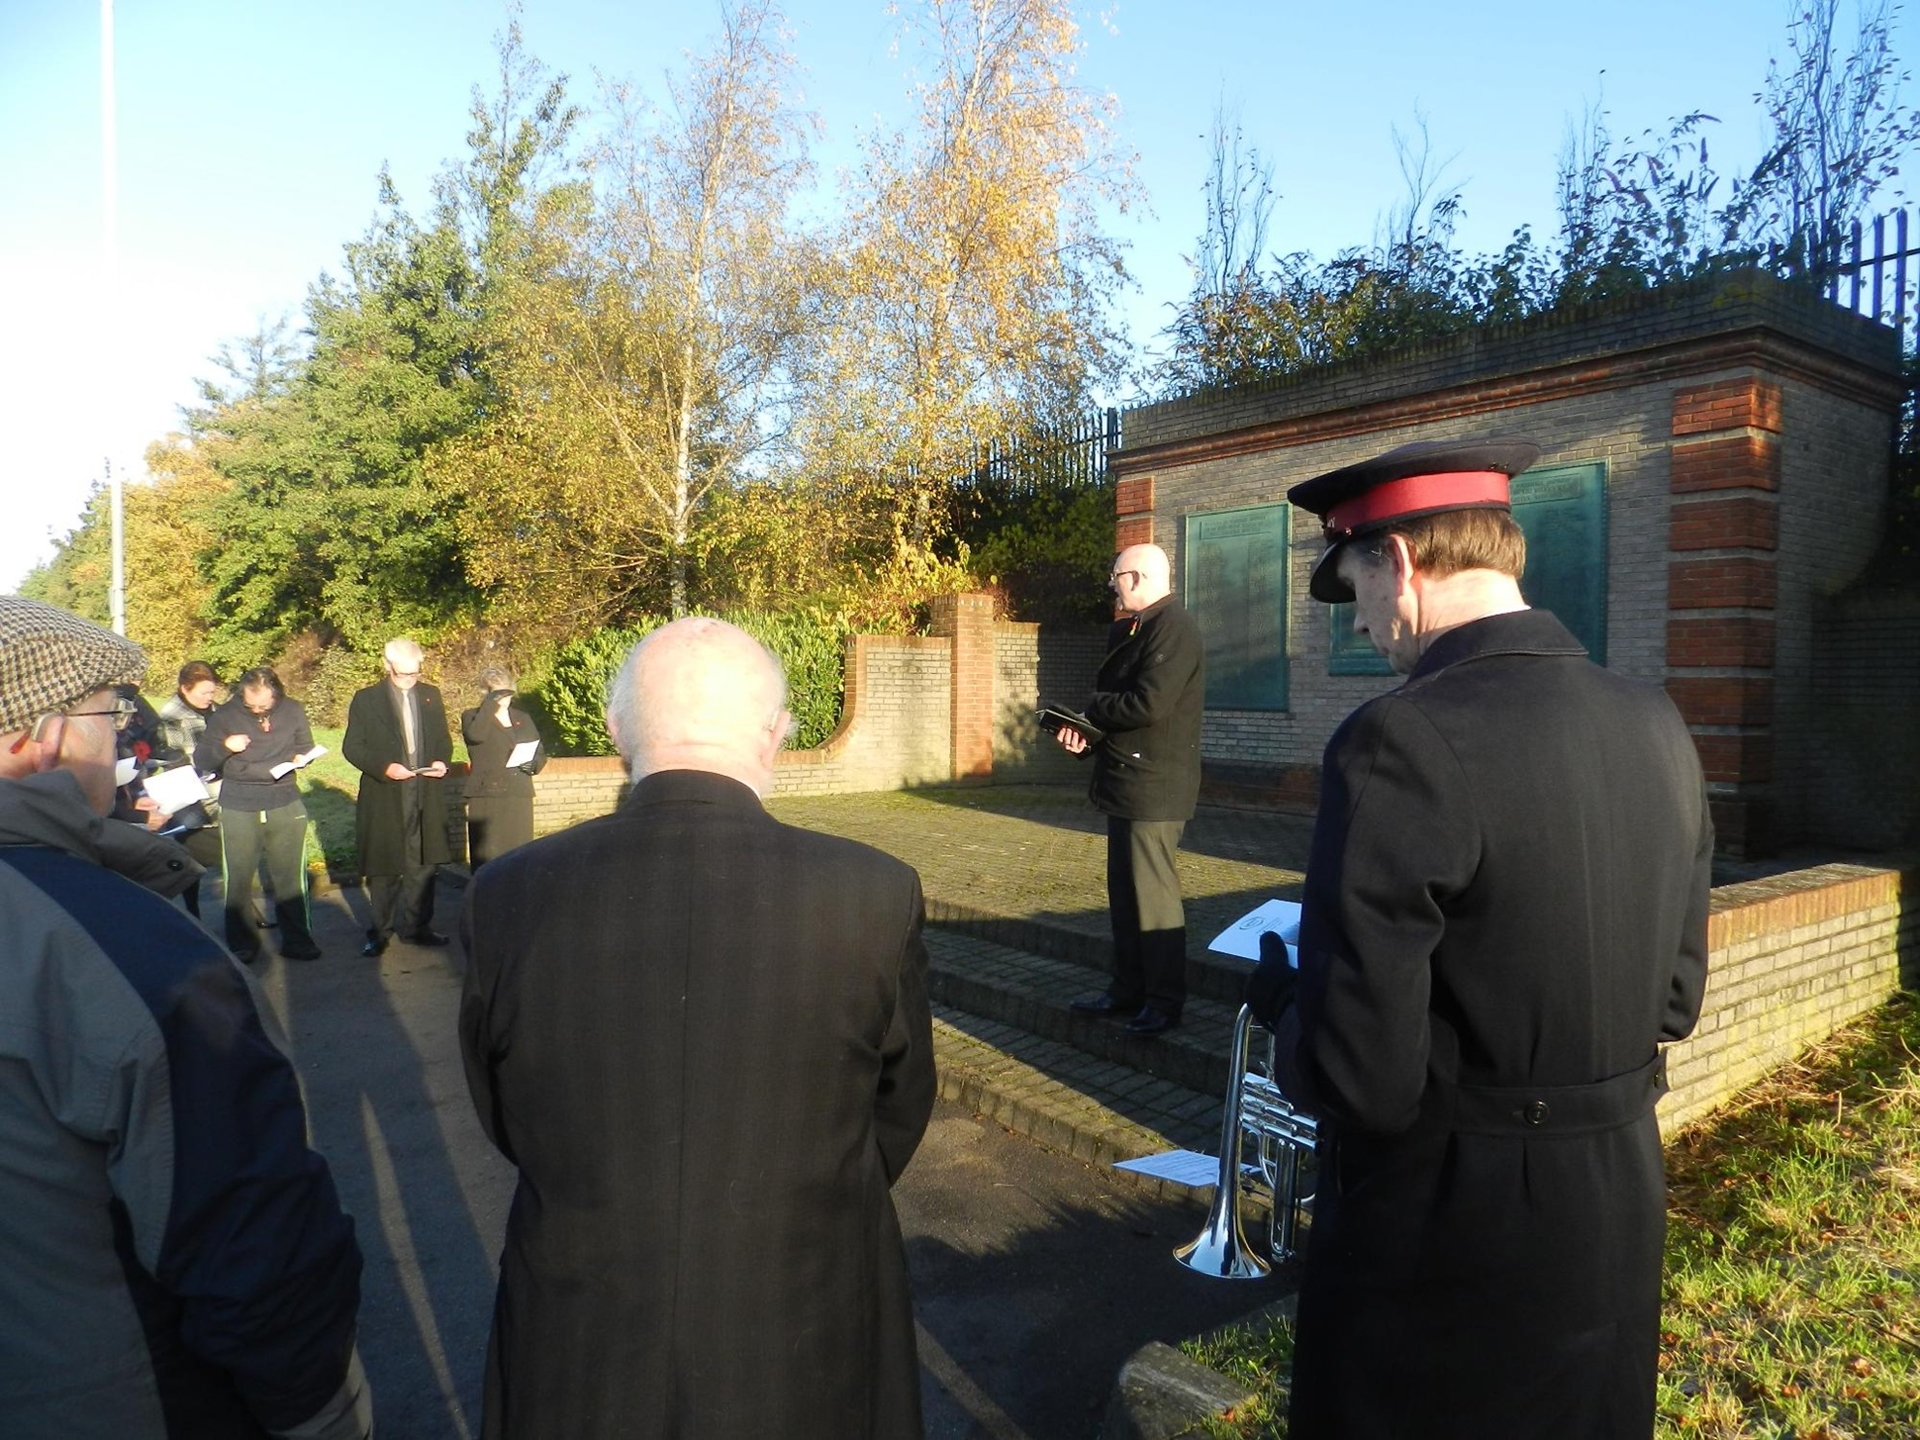 REMEMBRANCE CEREMONY FOR VAUXHALL HEROES